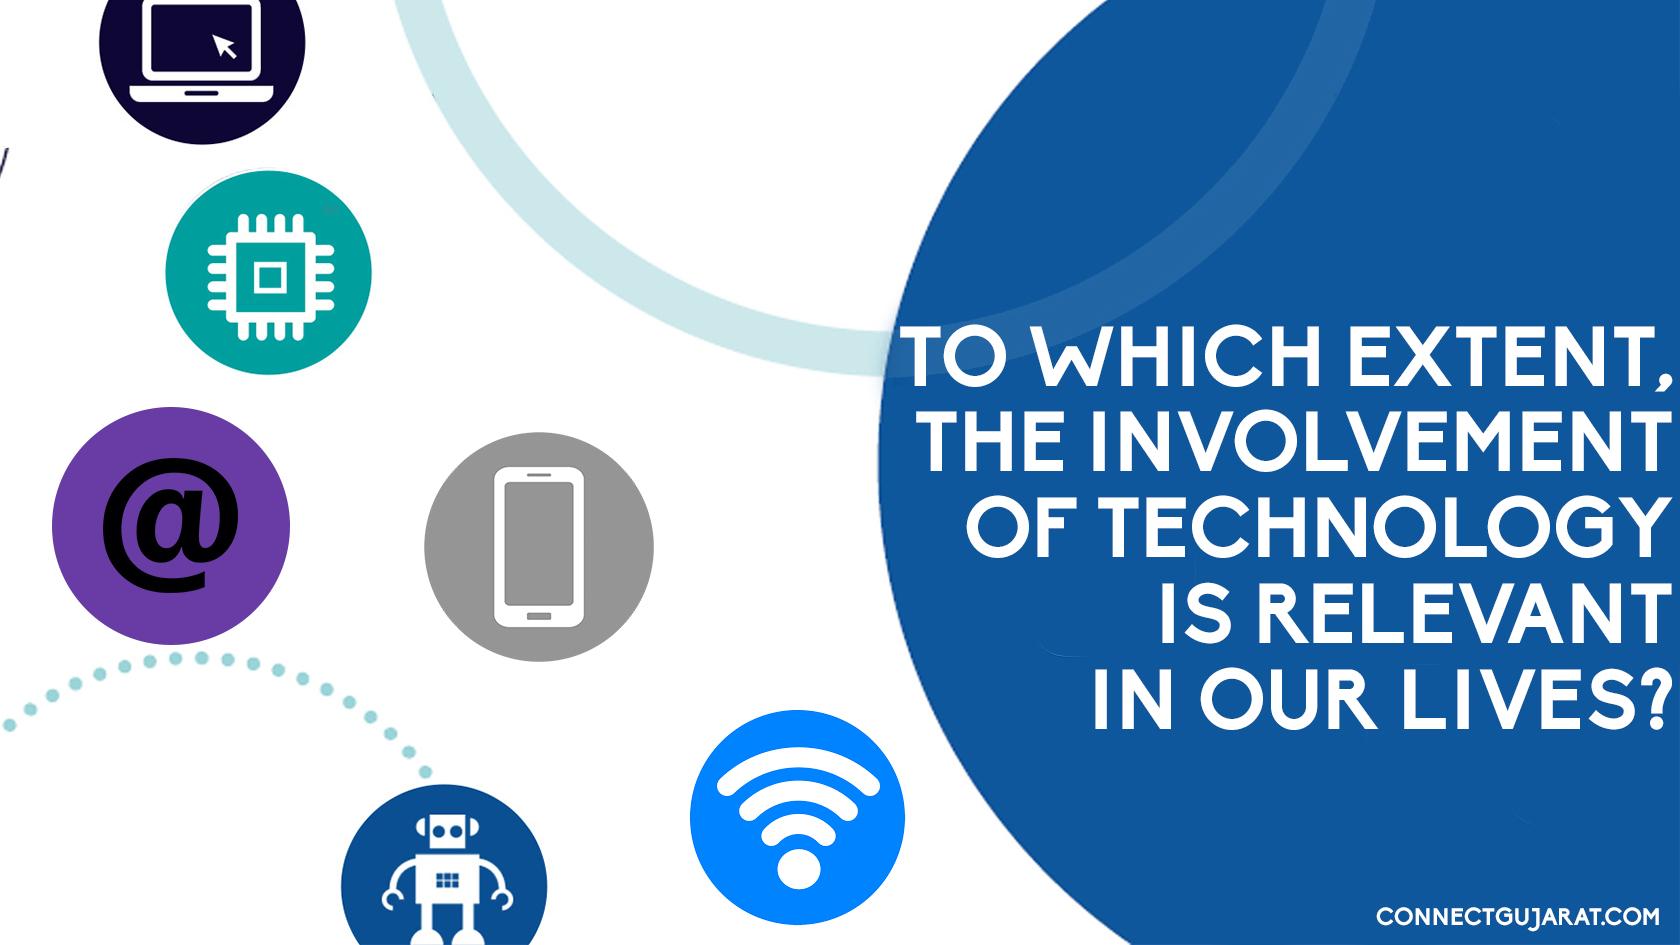 To which extent, the involvement of technology is relevant in our lives?